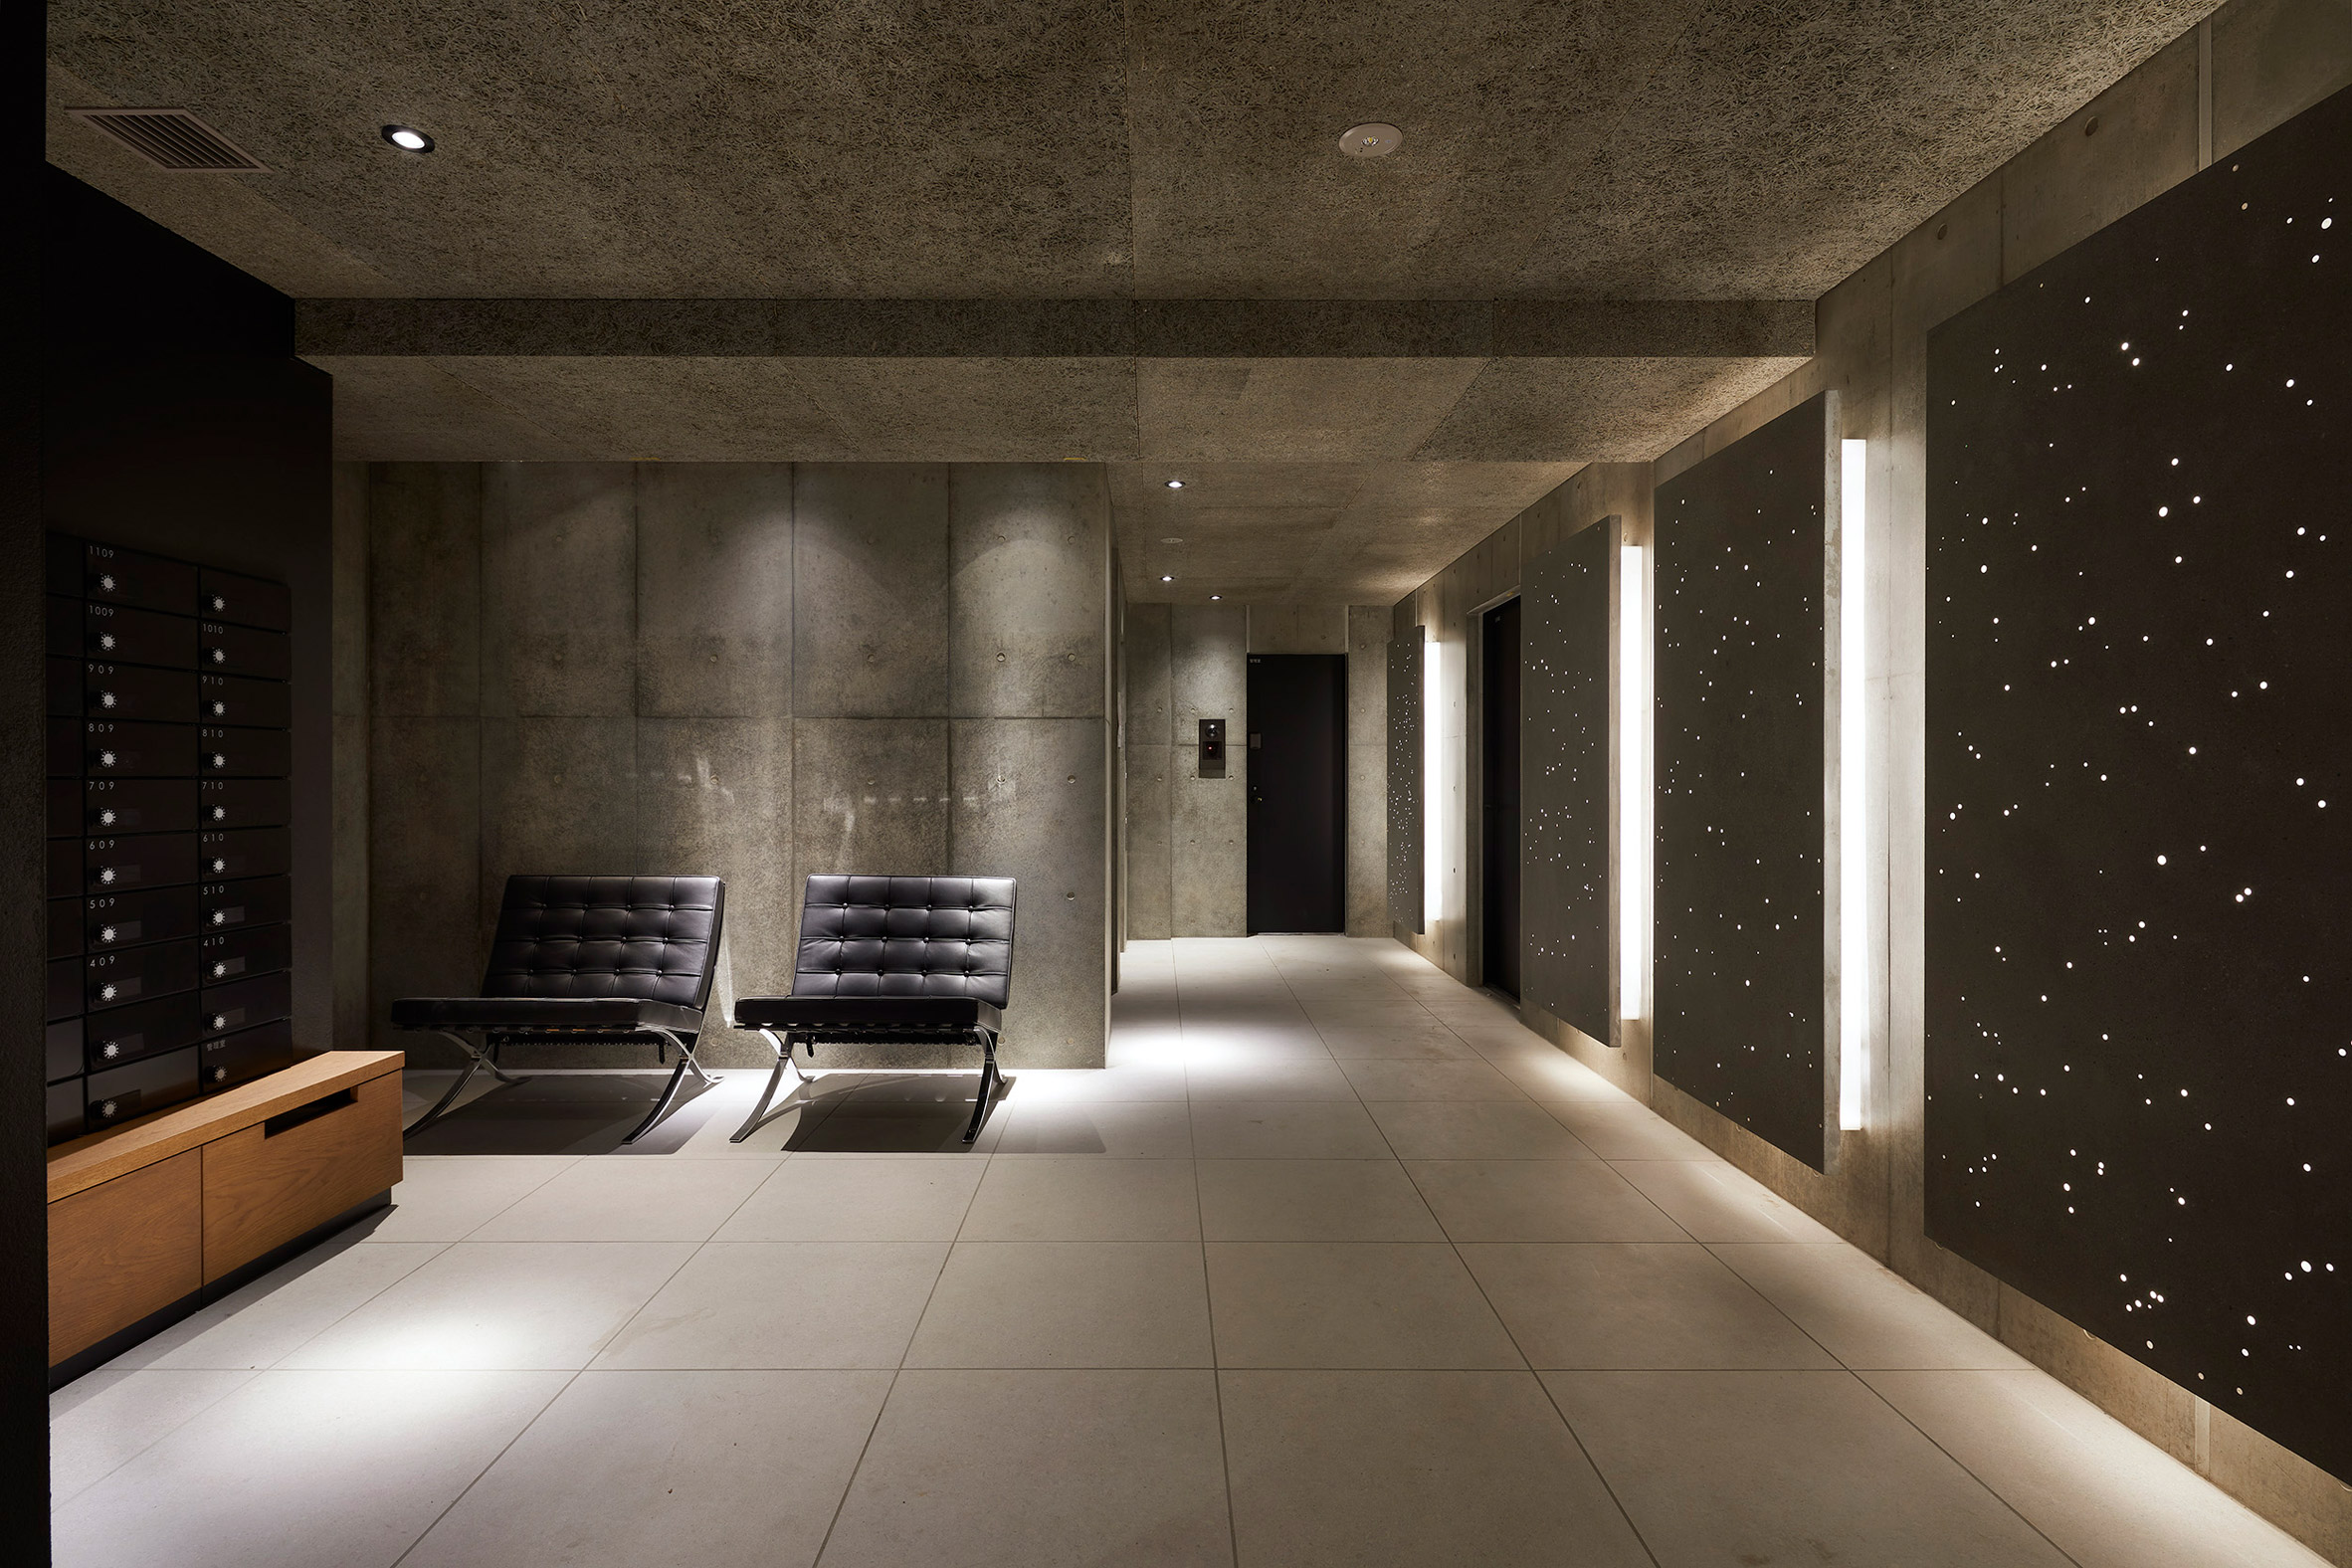 Concrete covers the walls of the interior of Kannai Blade Residence